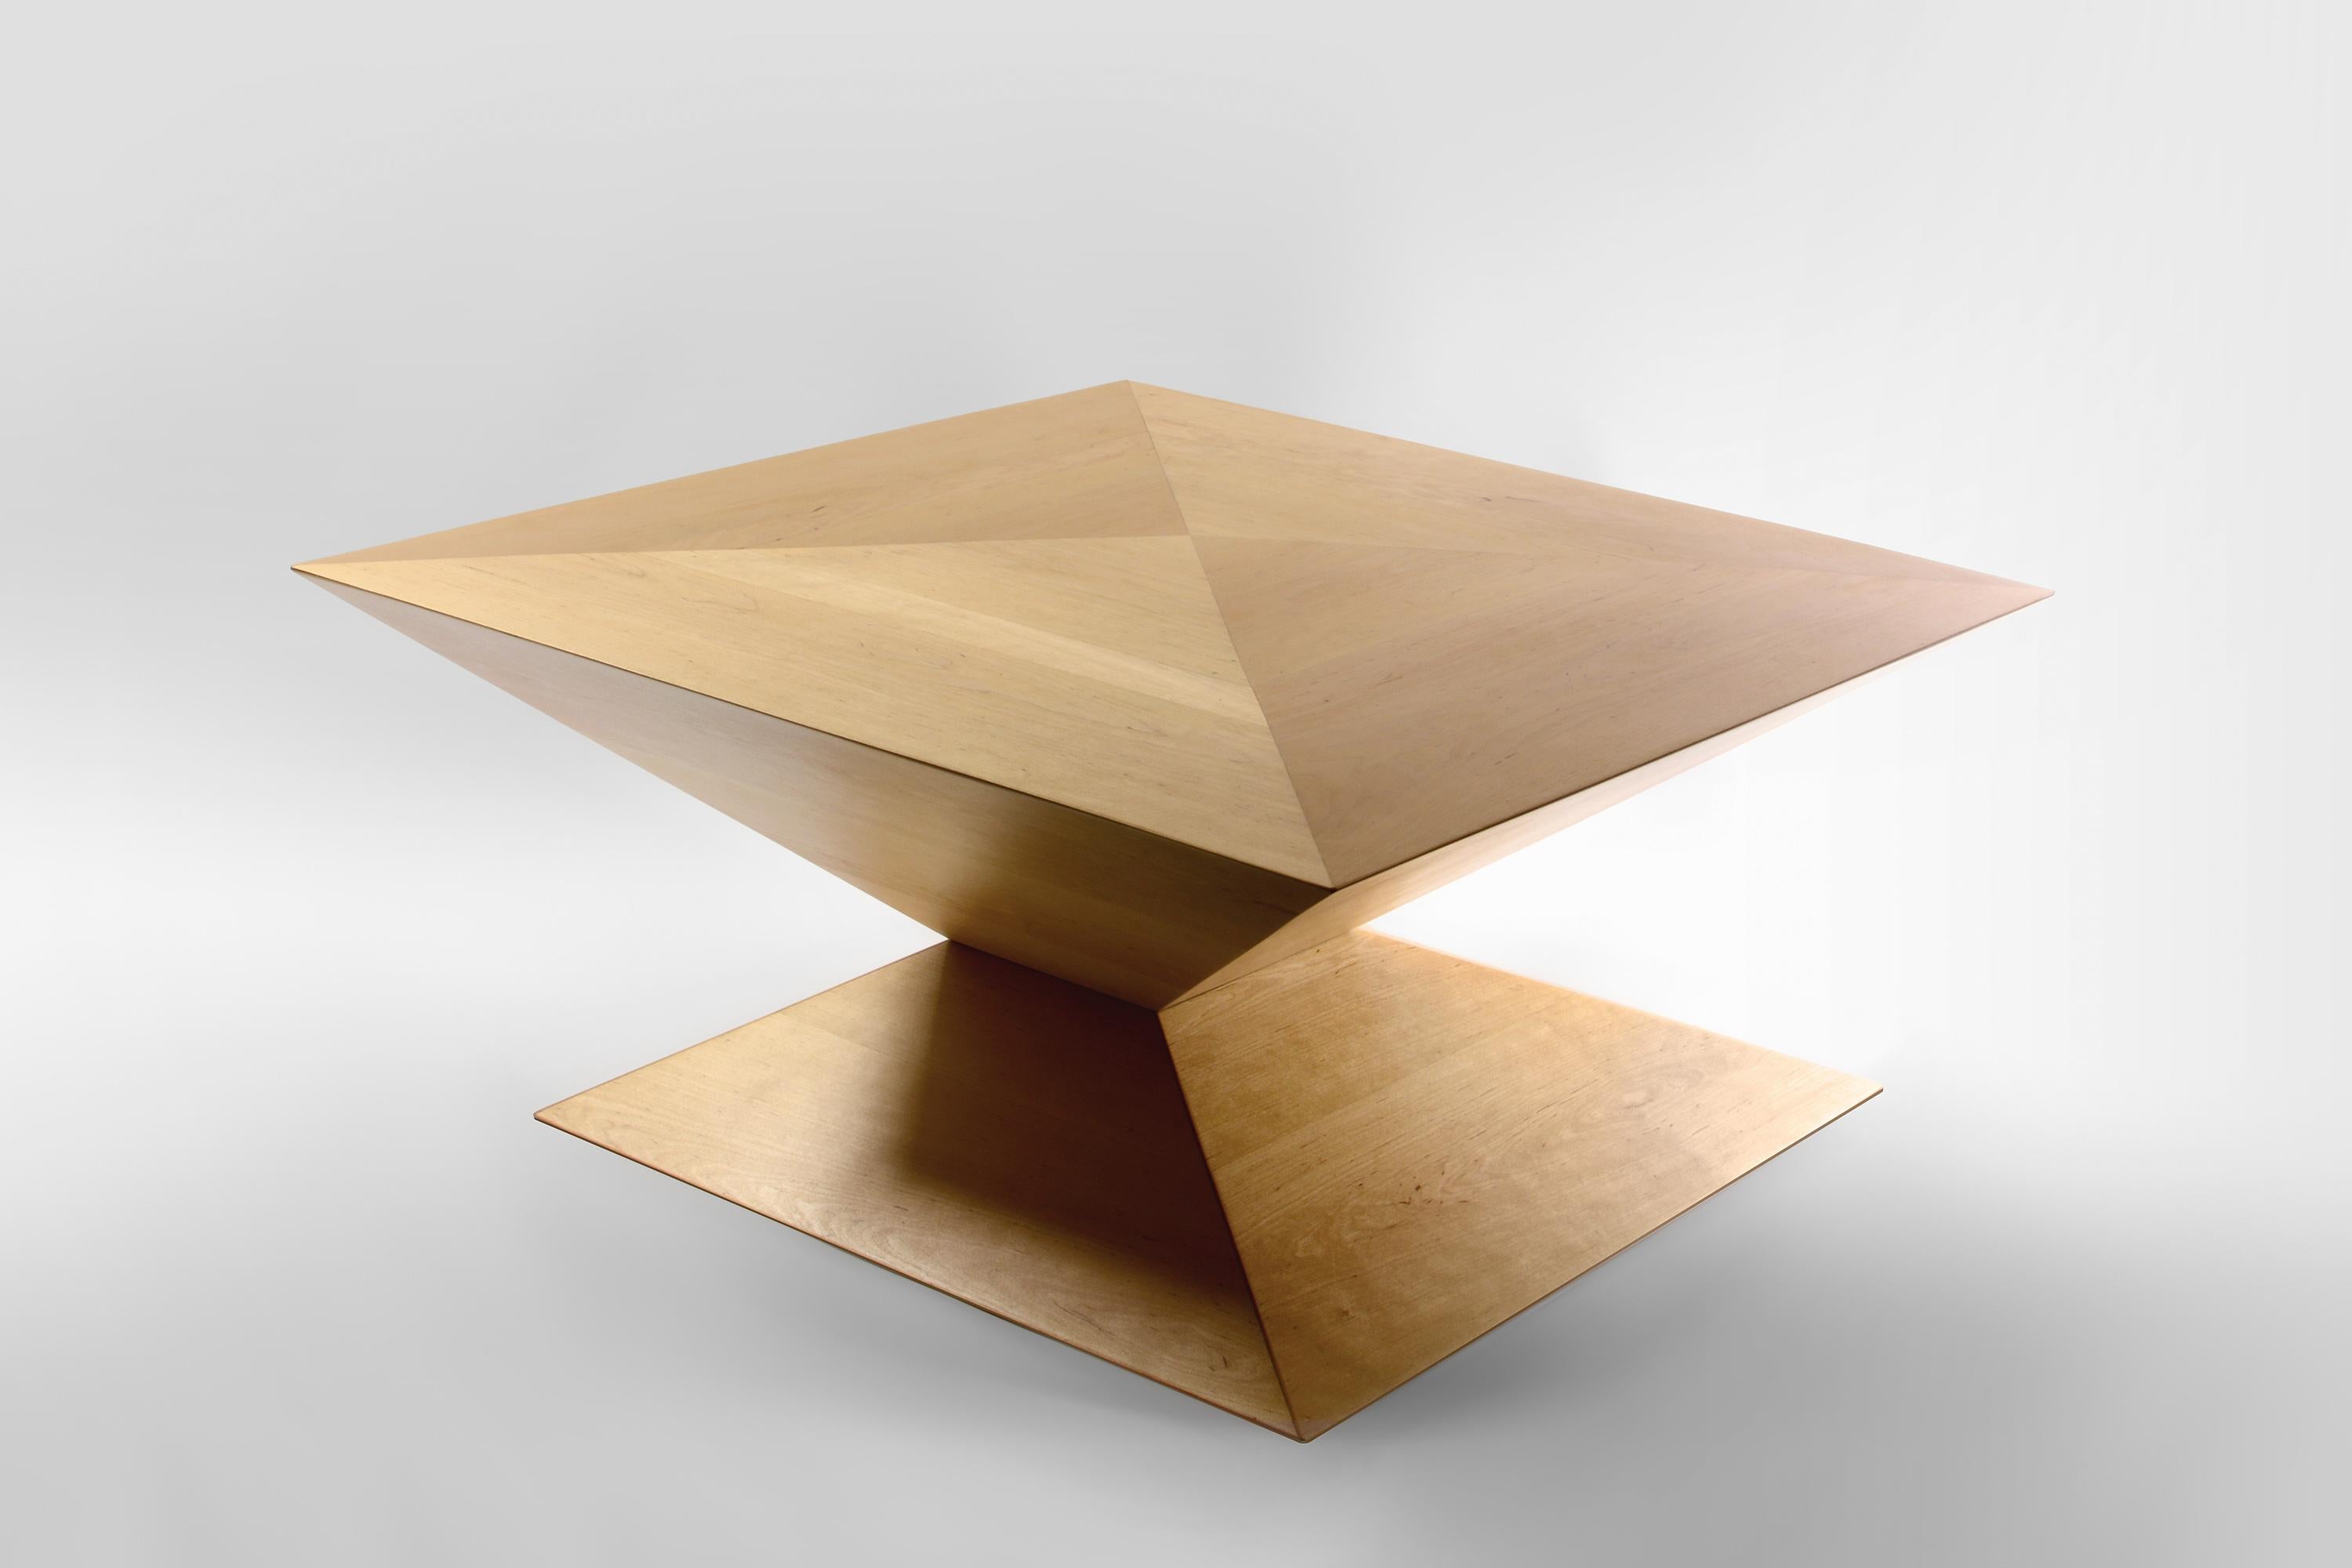 The Coffee Table from Szostak Atelier is a stunning piece of furniture that blends functionality and design to create a masterpiece of craftsmanship. The asymmetrical and dynamic shape of this table is both graceful and eye-catching, making it a